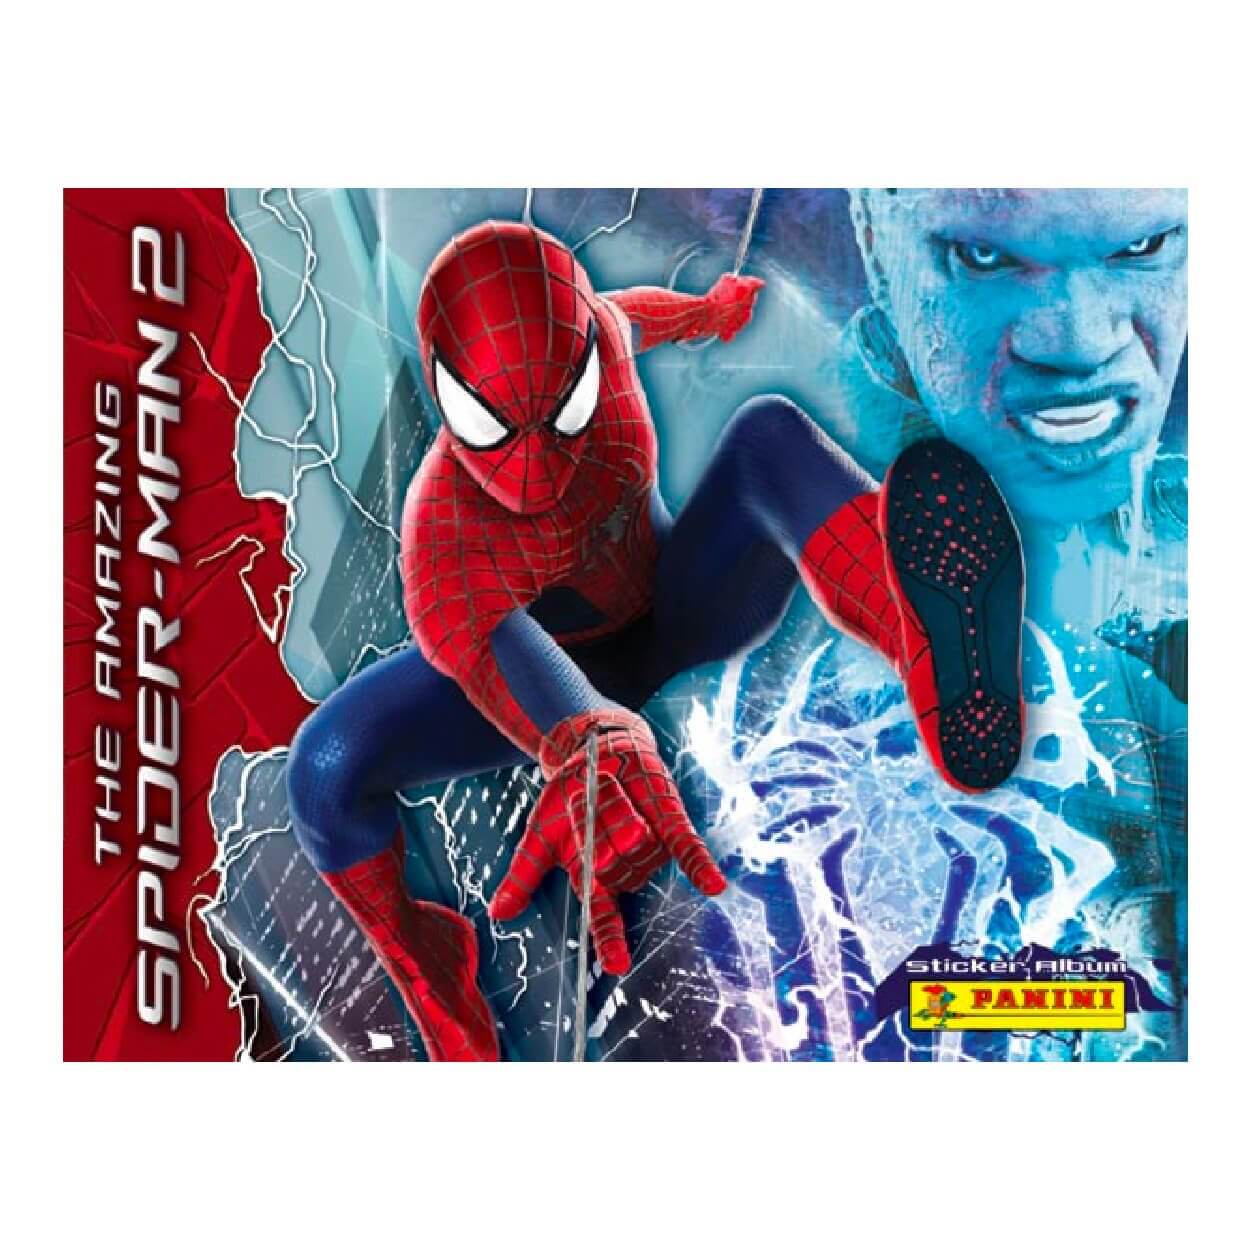 Earthlets Amazing Spiderman Sticker Collection Product: Starter Pack Sticker Collection Earthlets